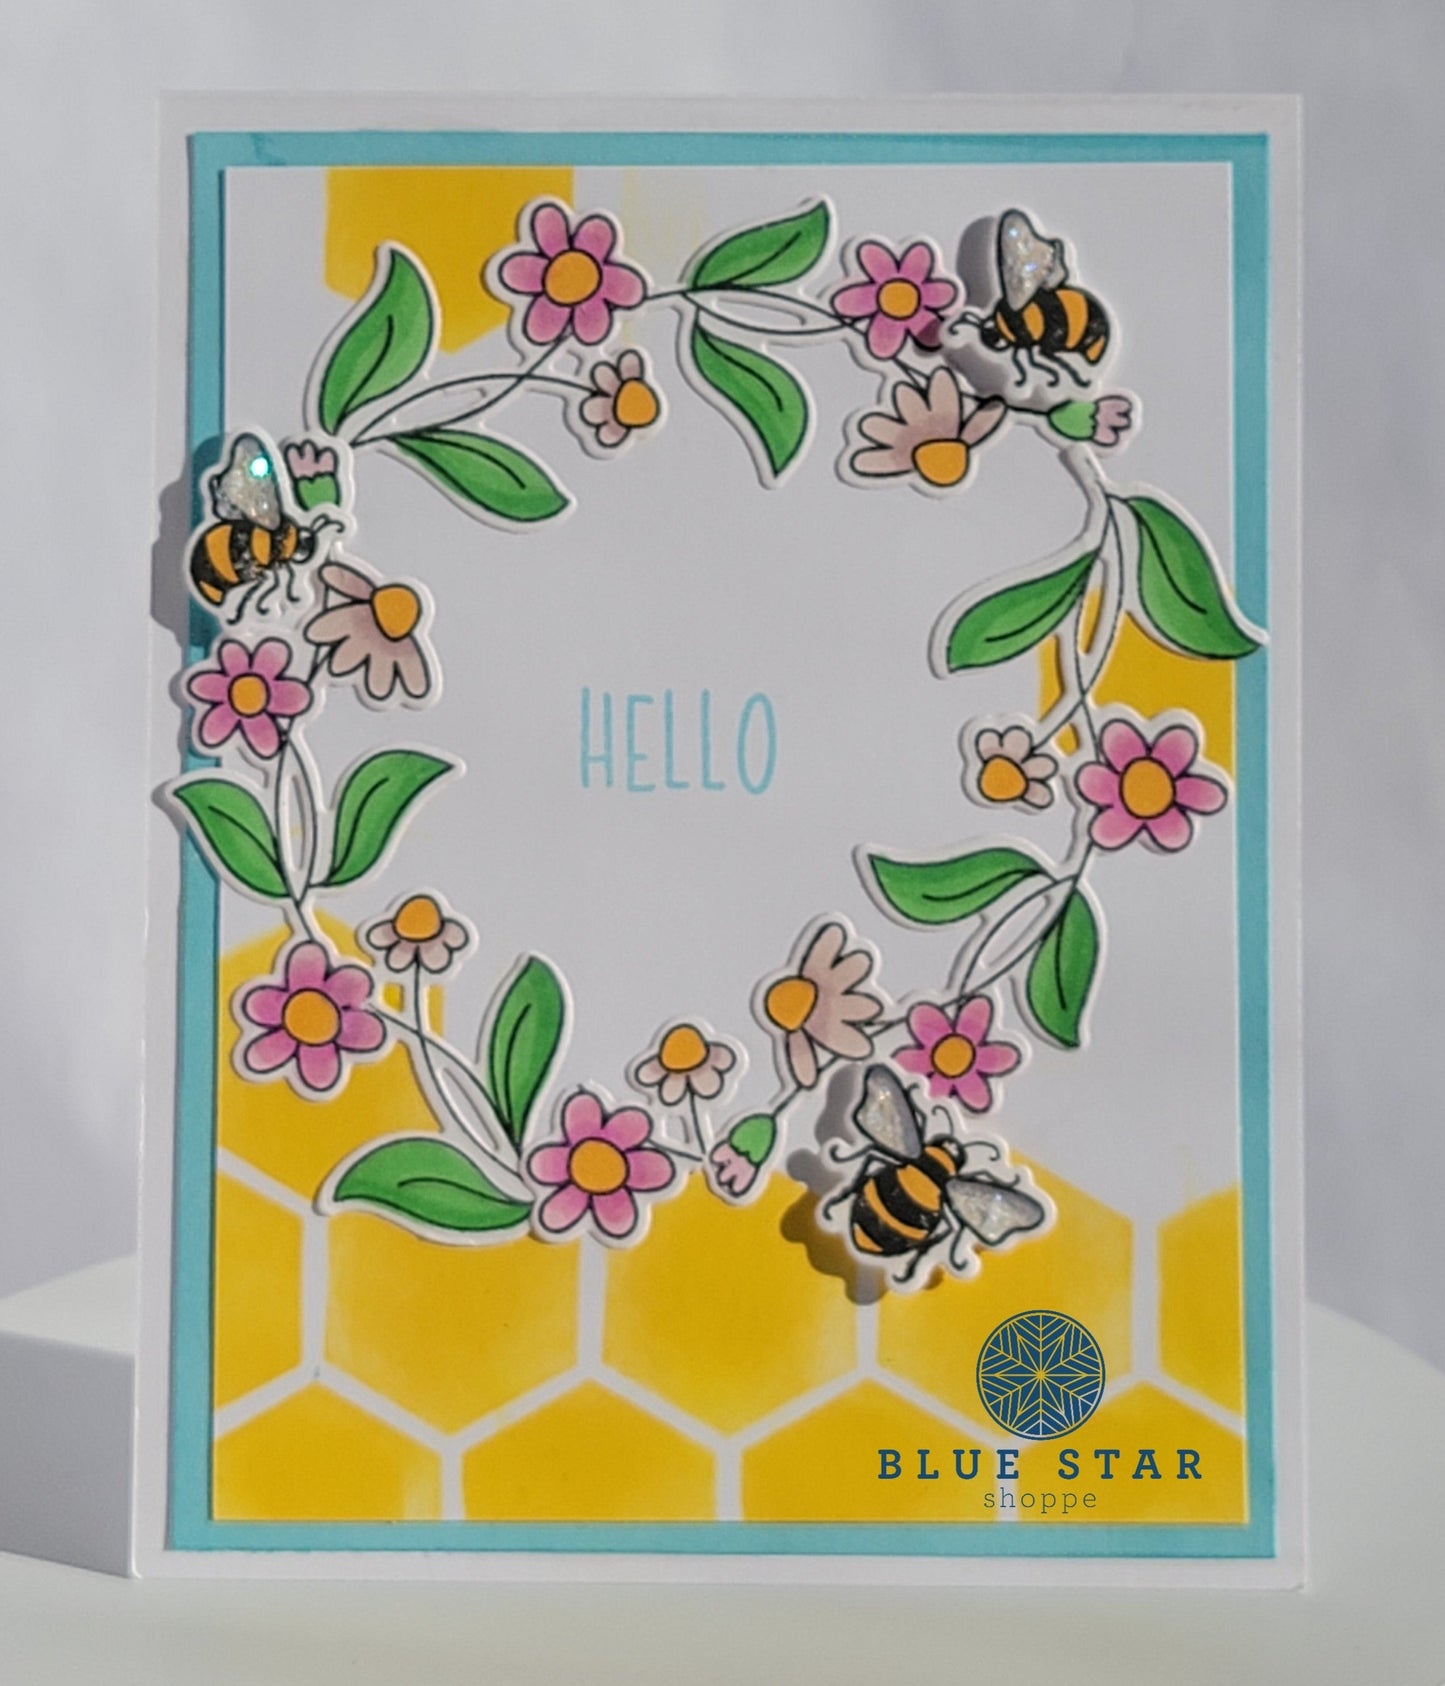 Hello (bees and honeycomb)